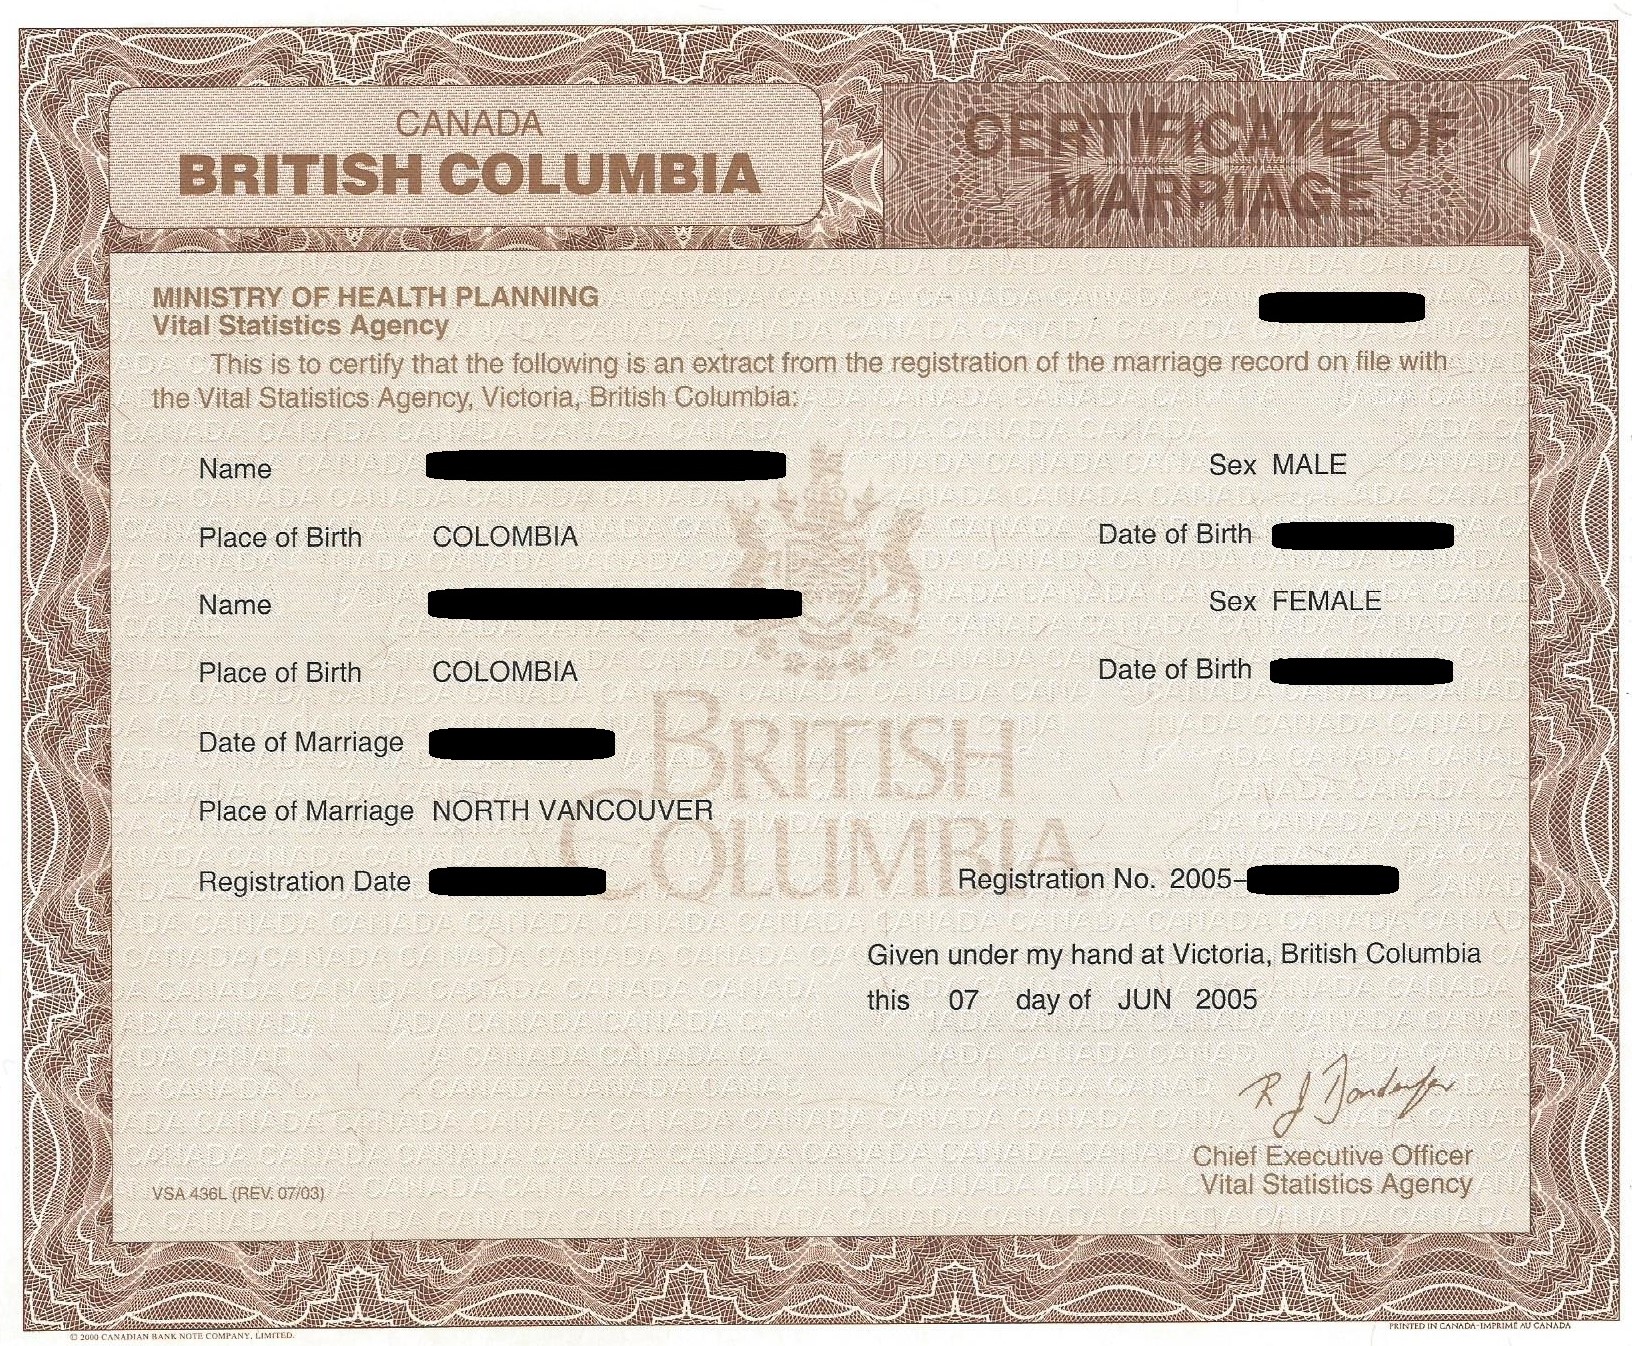 Example of a British Columbia marriage certificate issued by Vital Statistics